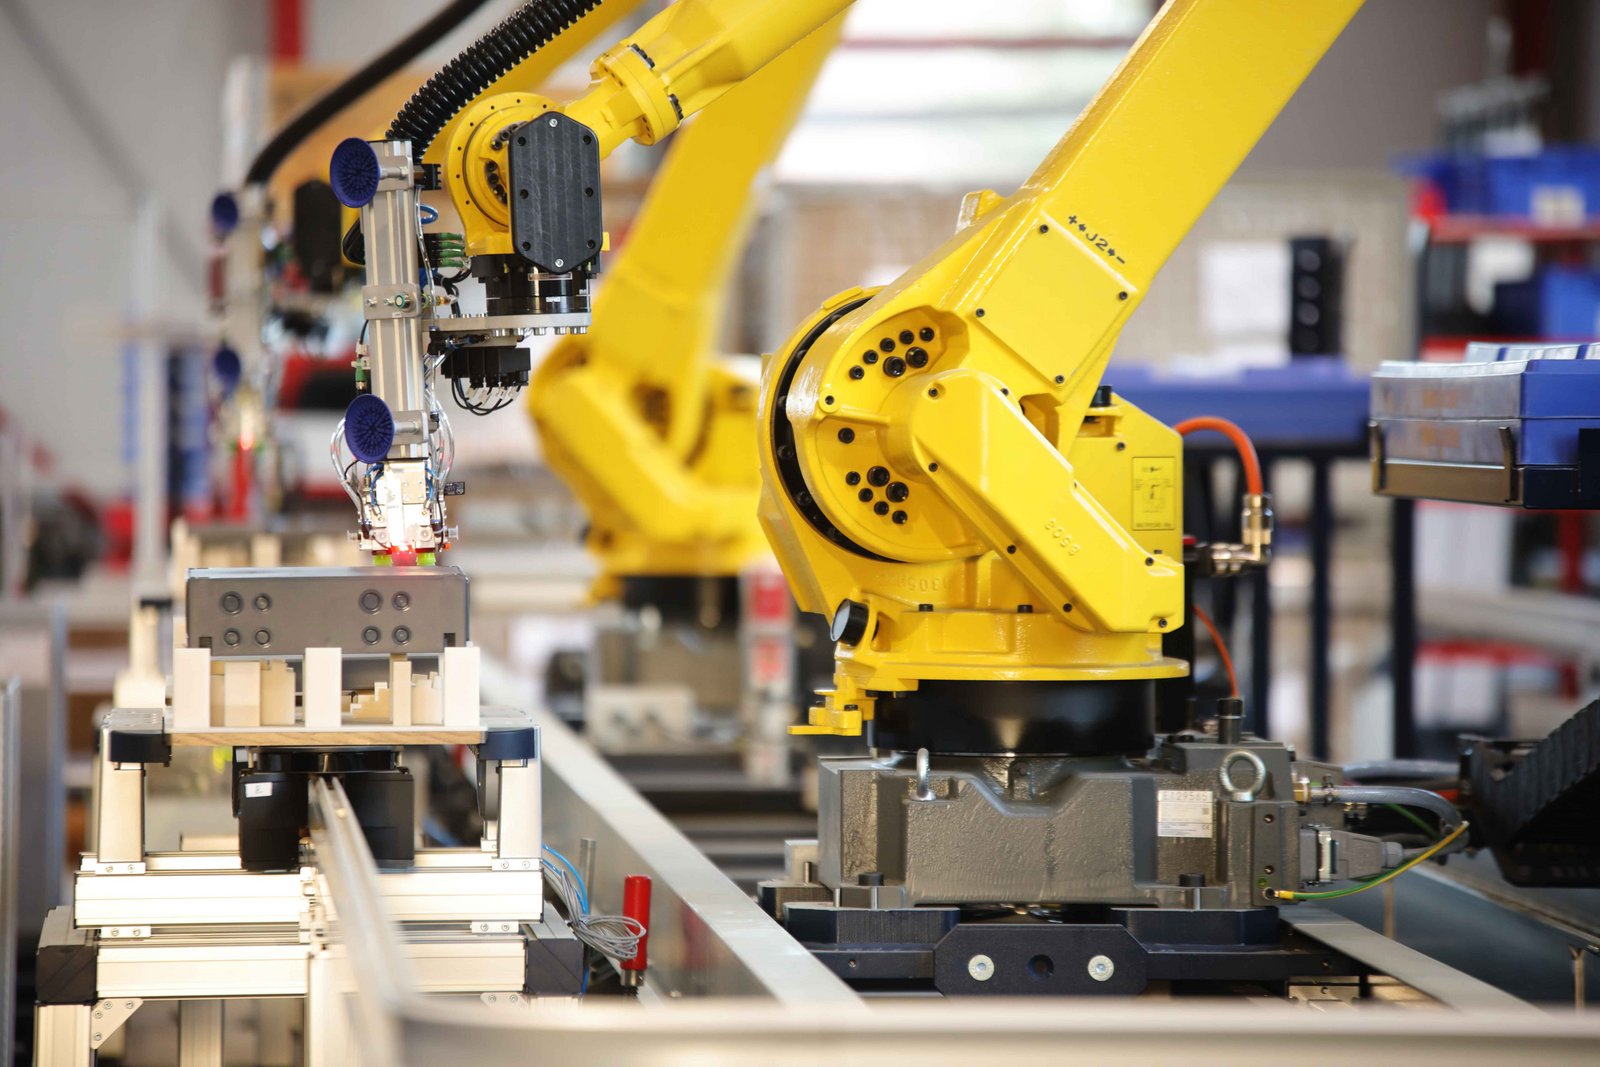 Robot automated provisioning on workpiece carriers